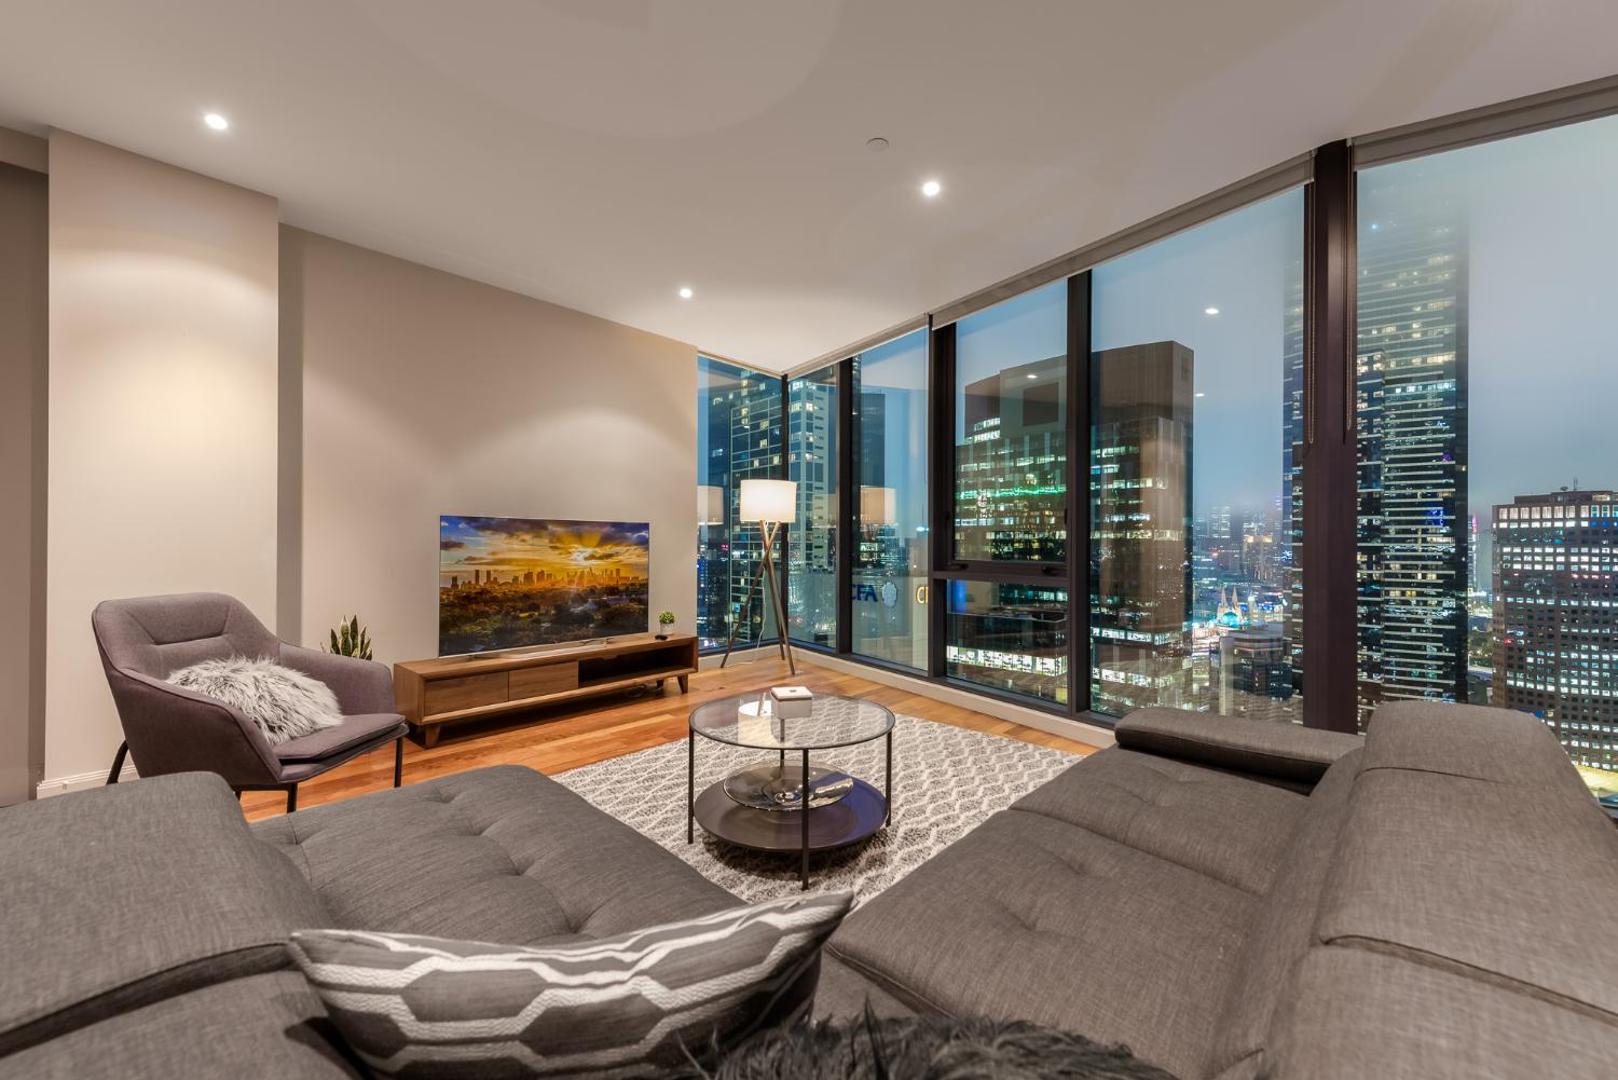 Exclusive Stays – SouthbankONE Penthouse